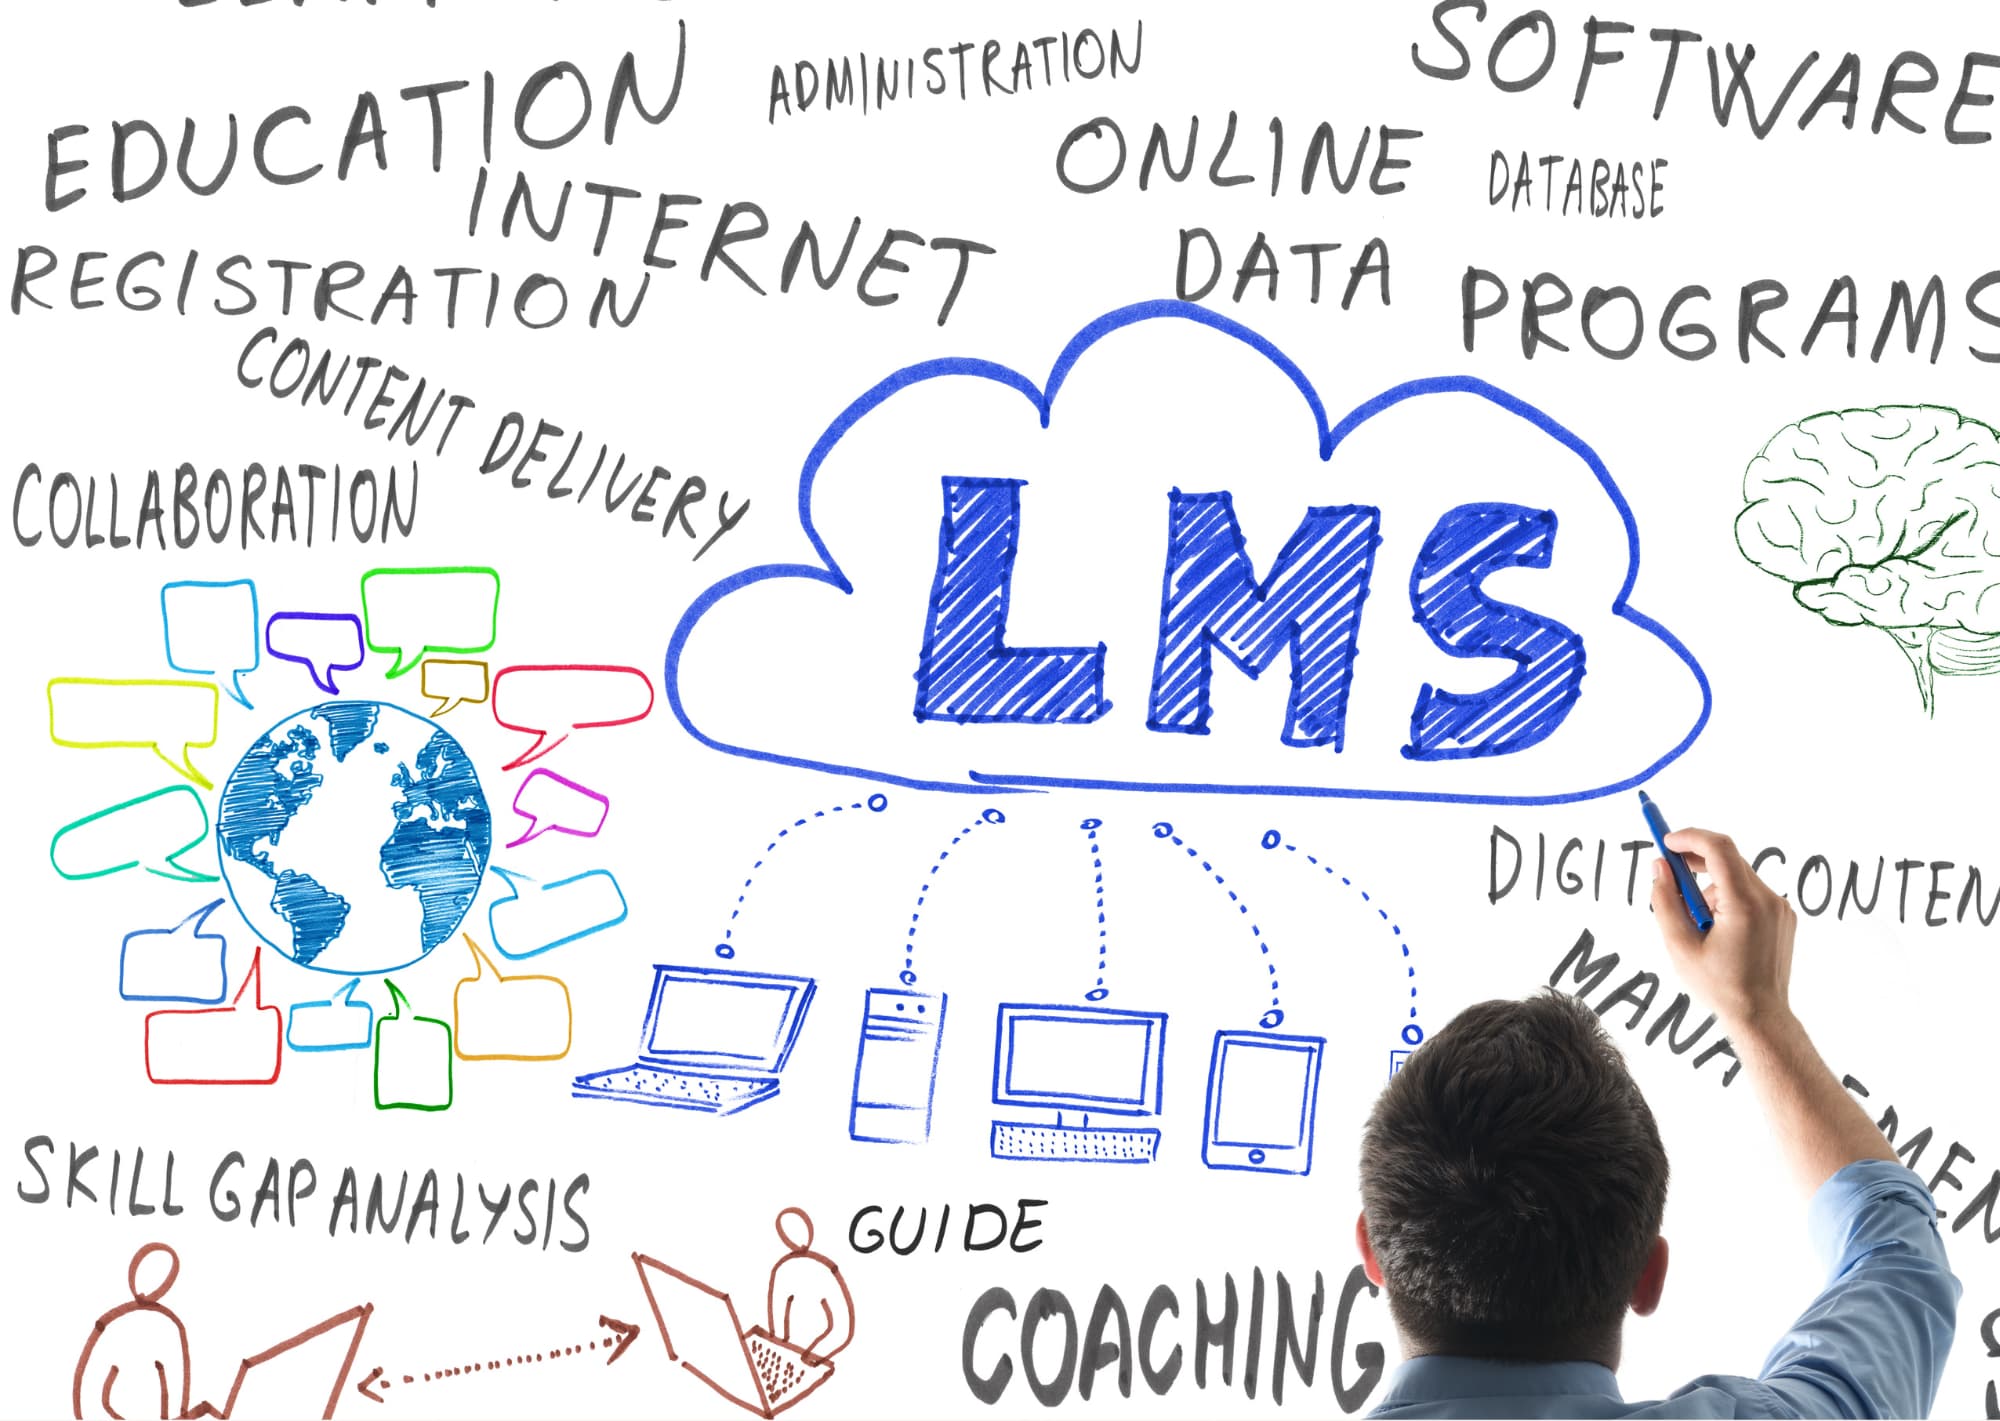 What is a Learning Management System